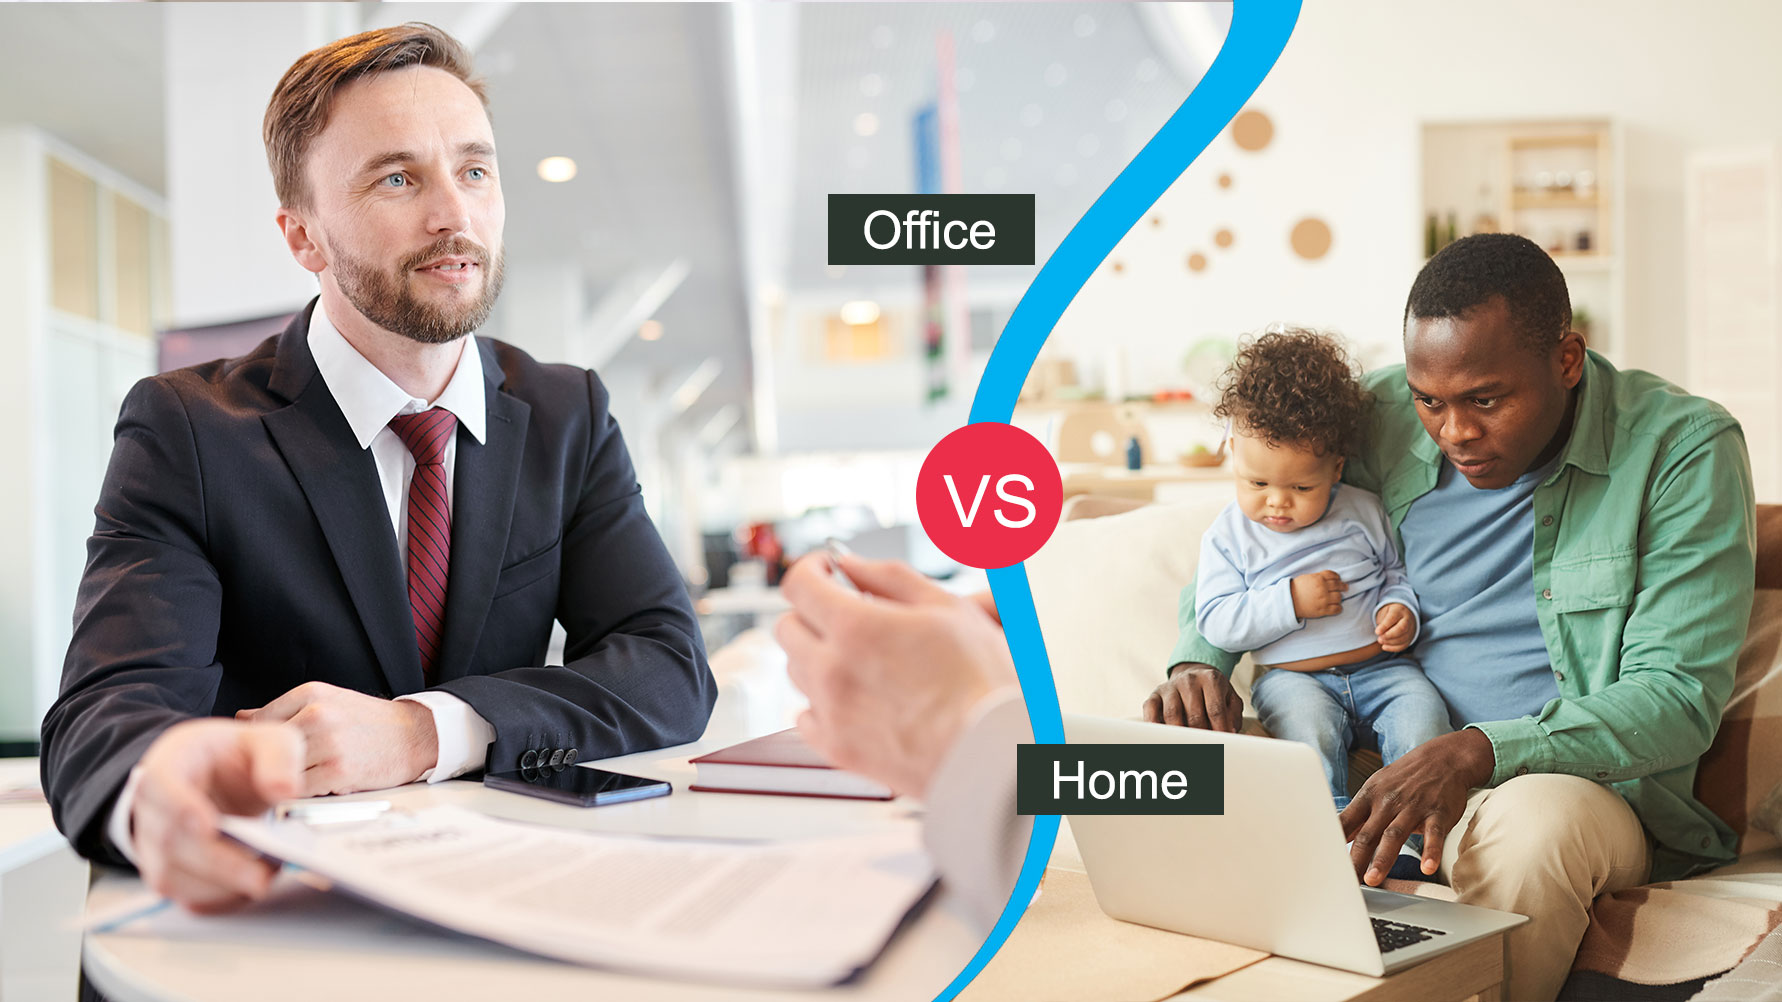 Work from Home vs Office The Differences Winner!